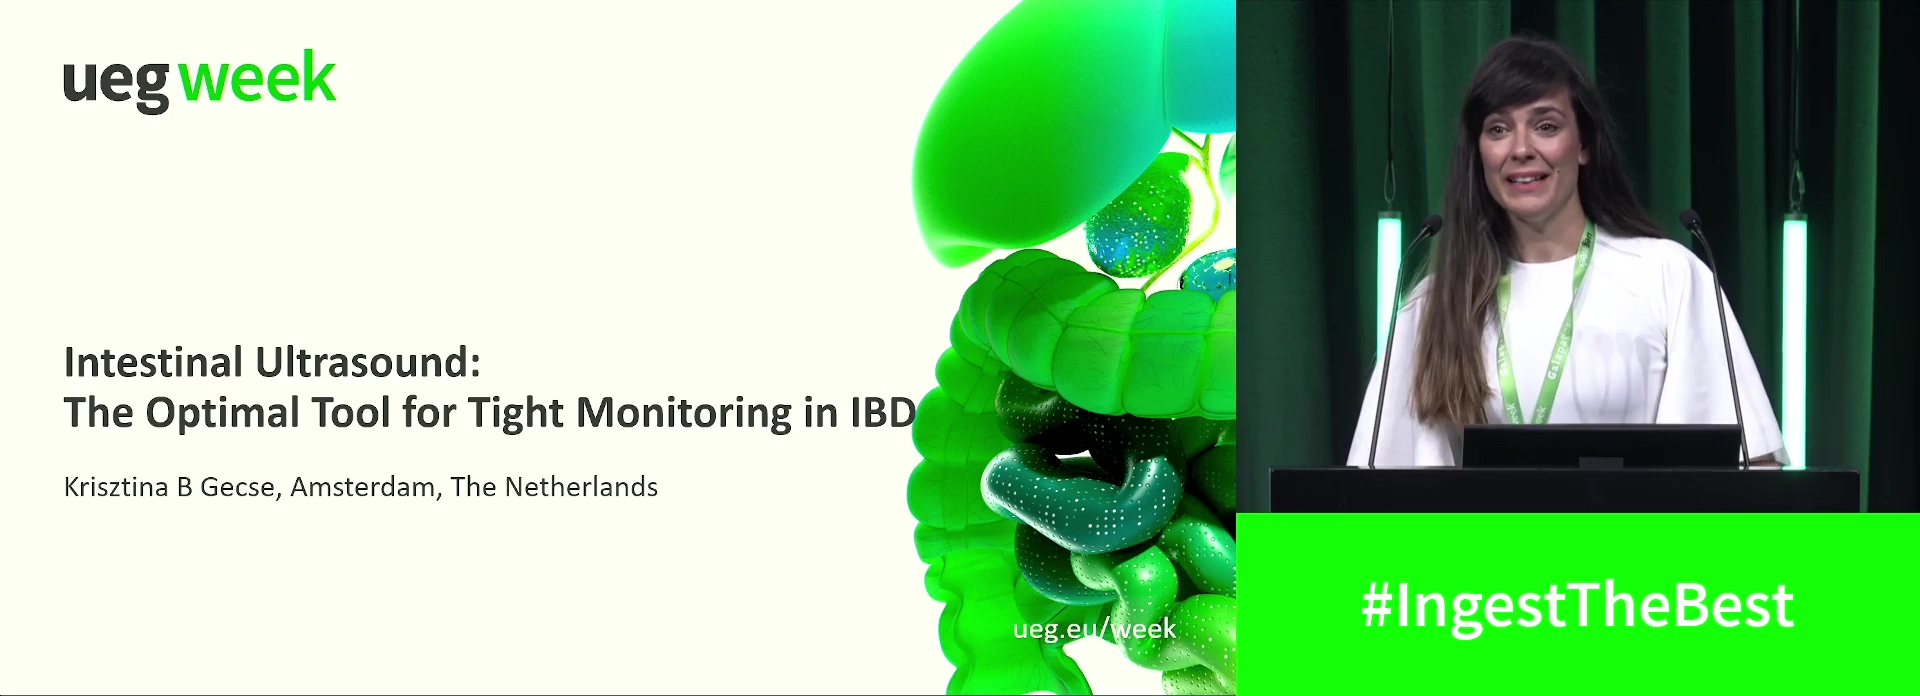 Intestinal ultrasound: The optimal tool for tight monitoring in IBD?